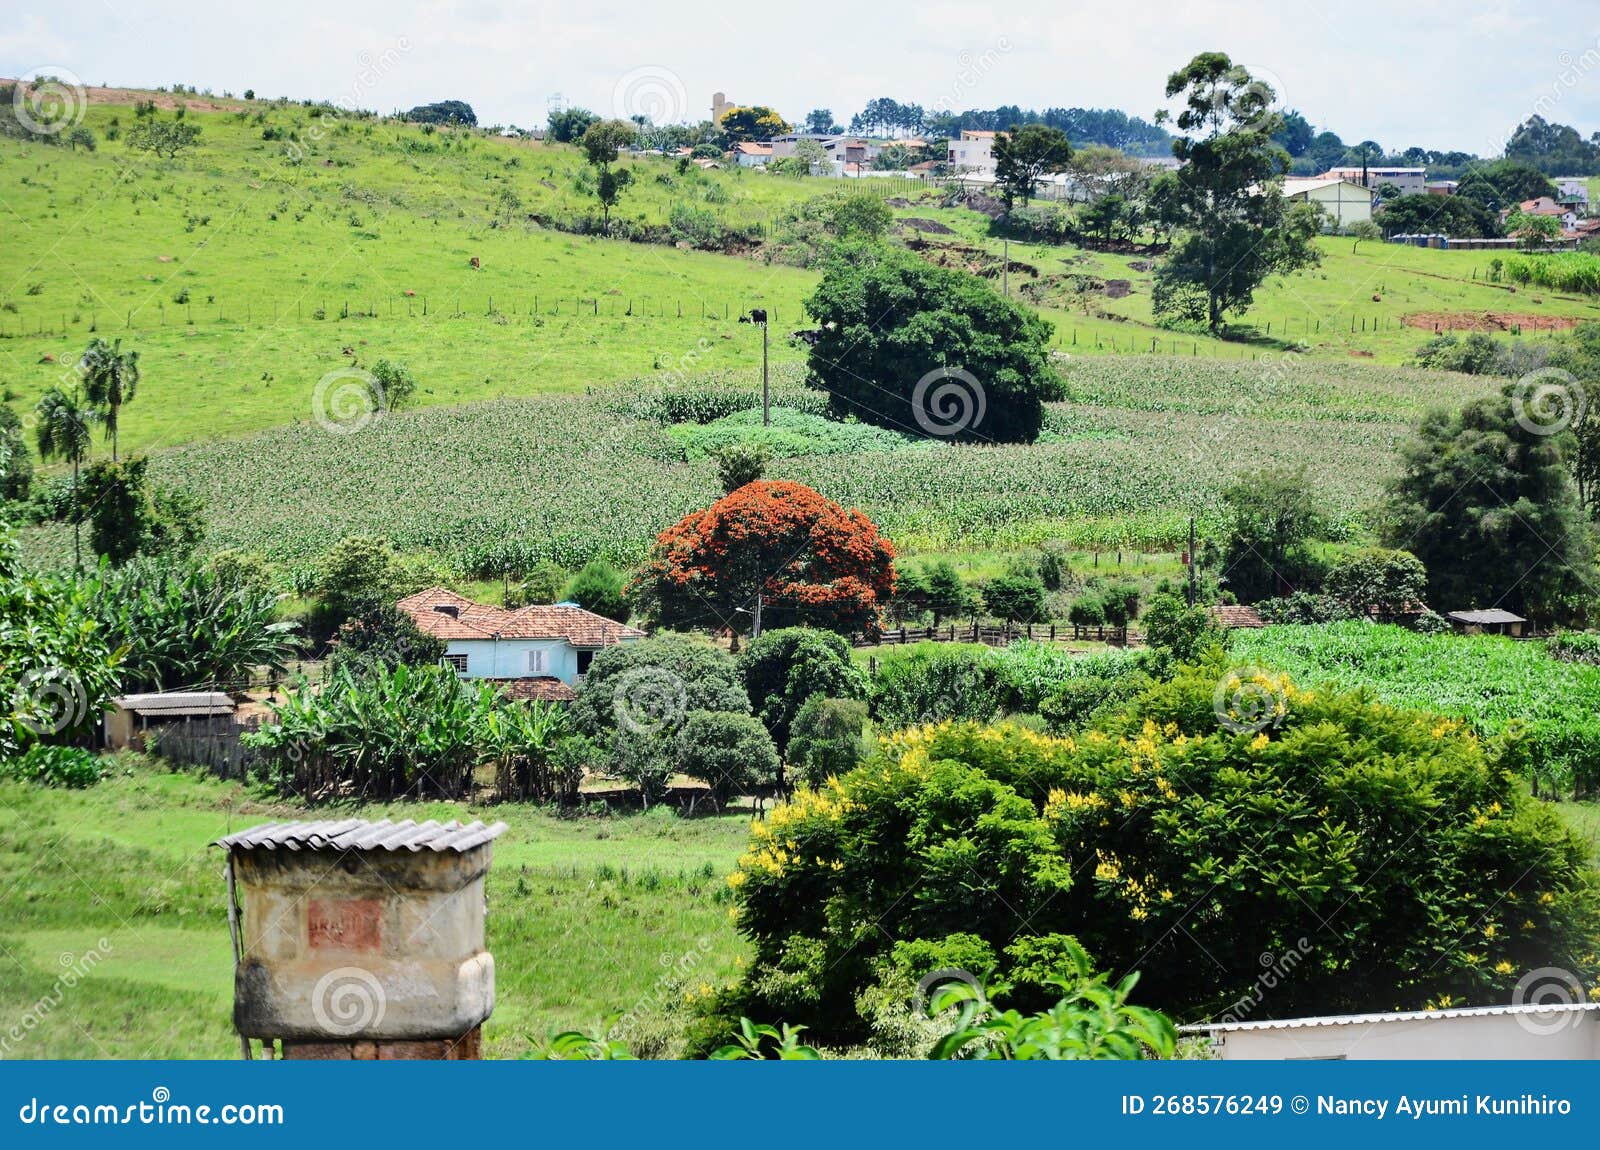 rural landscape in the middle of the small town of andrelÃ¢ndia